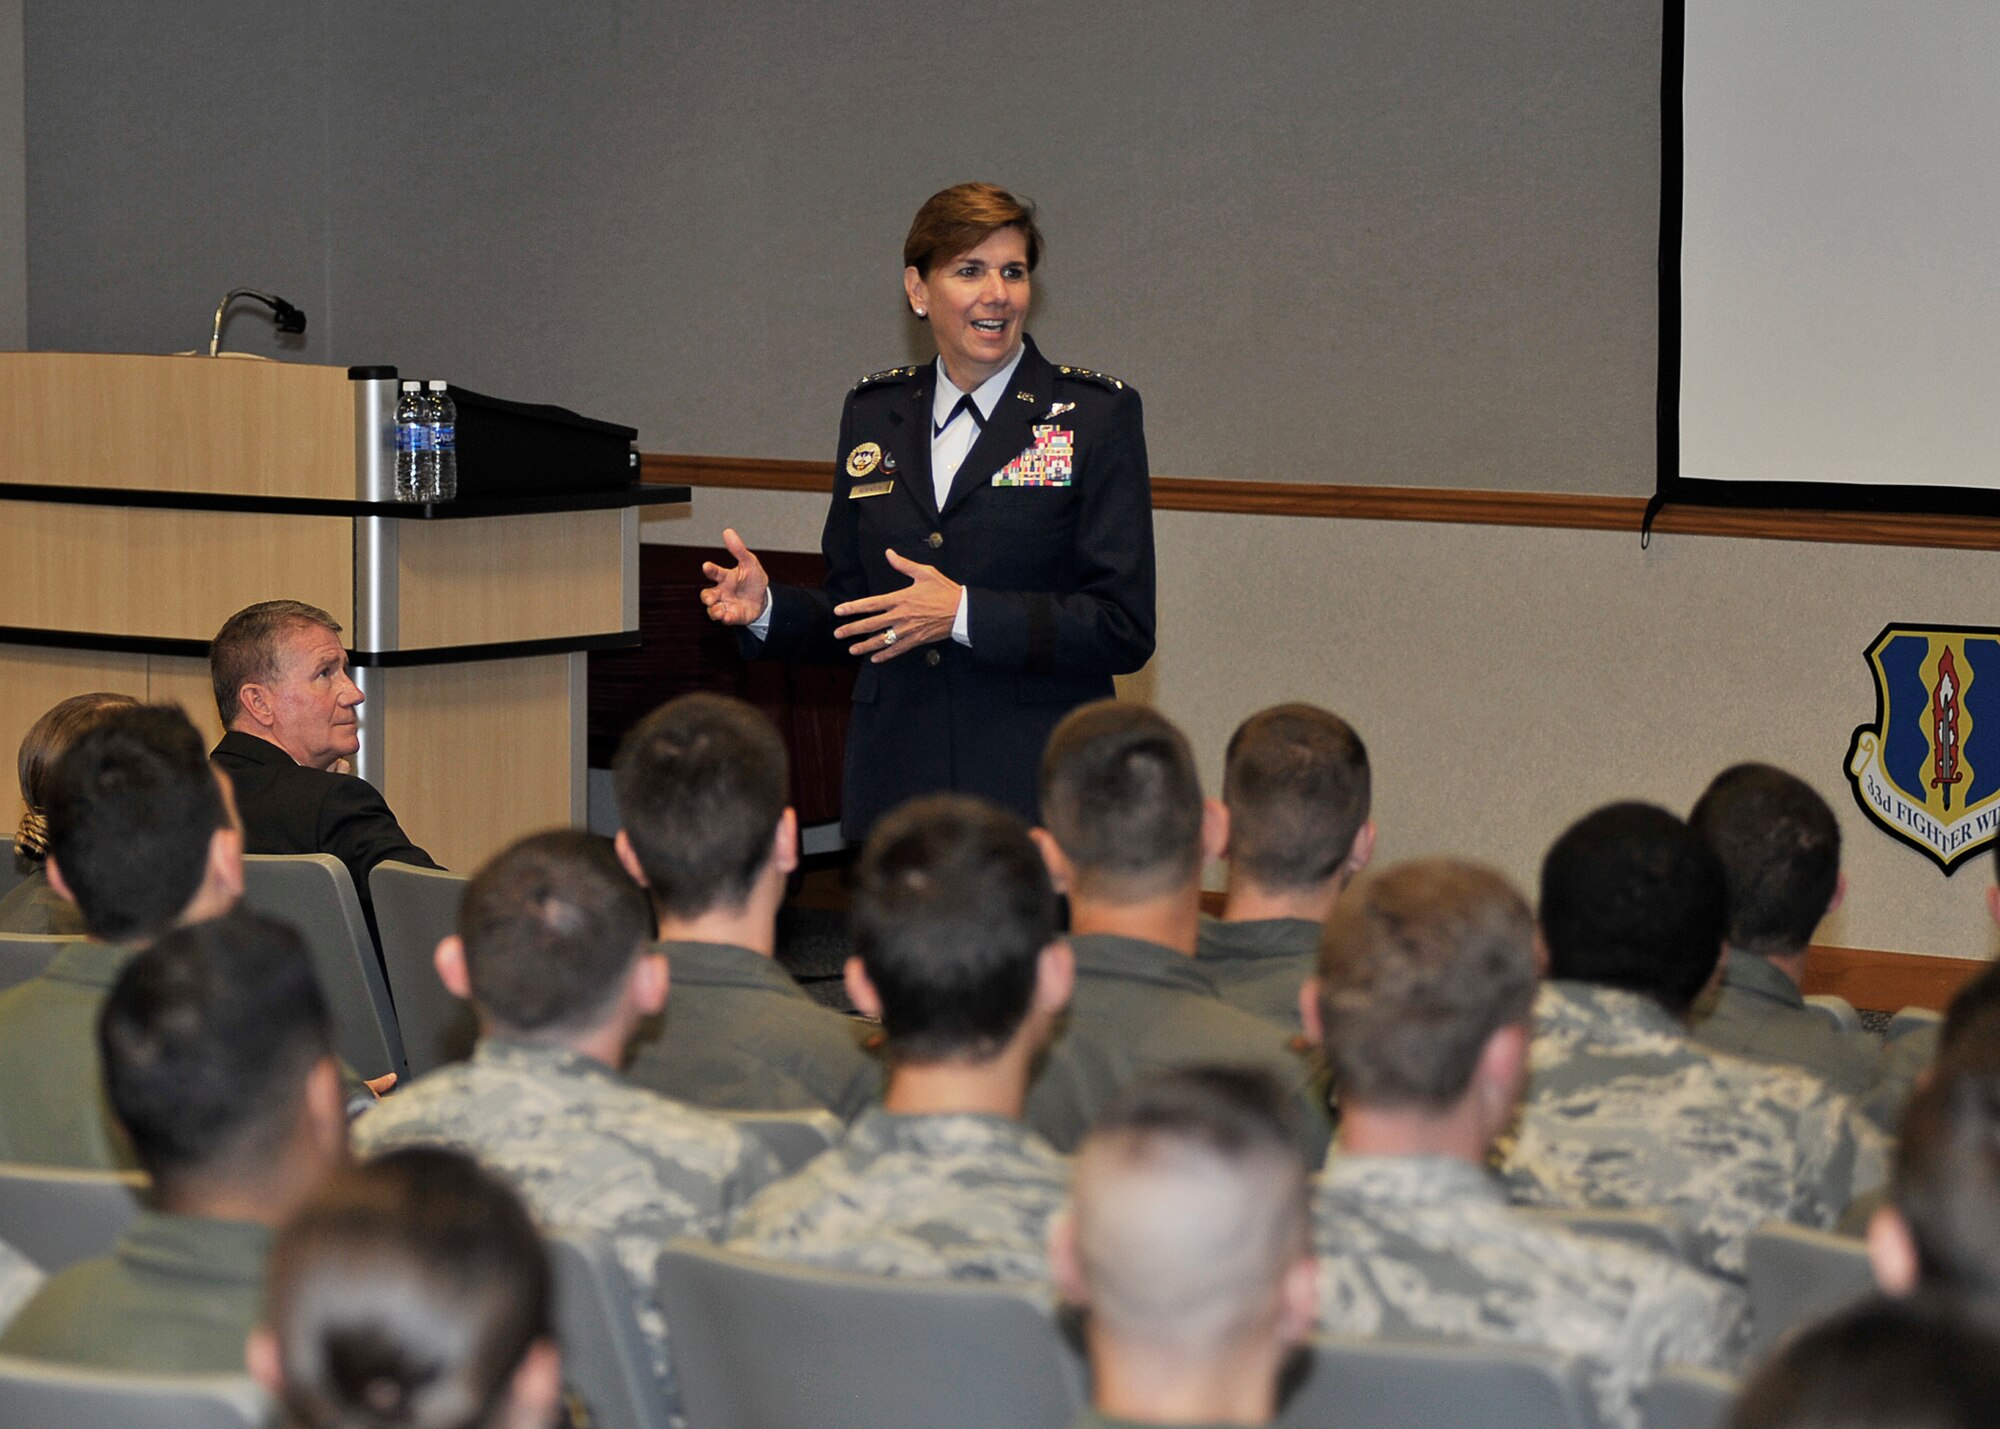 U.S. Air Force Gen. Lori J. Robinson, North American Aerospace Defense Command (NORAD) and United States Northern Command (USNORTHCOM) commander, speaks to Airmen of the 337th Air Control Squadron at Tyndall Air Force Base, Fla., July 6, 2016. Robinson spoke to Airmen about her time in the Air Force and the experiences she had as an air battle manager and commander. (U.S. Air Force photo by Senior Airman Sergio A. Gamboa/Released)